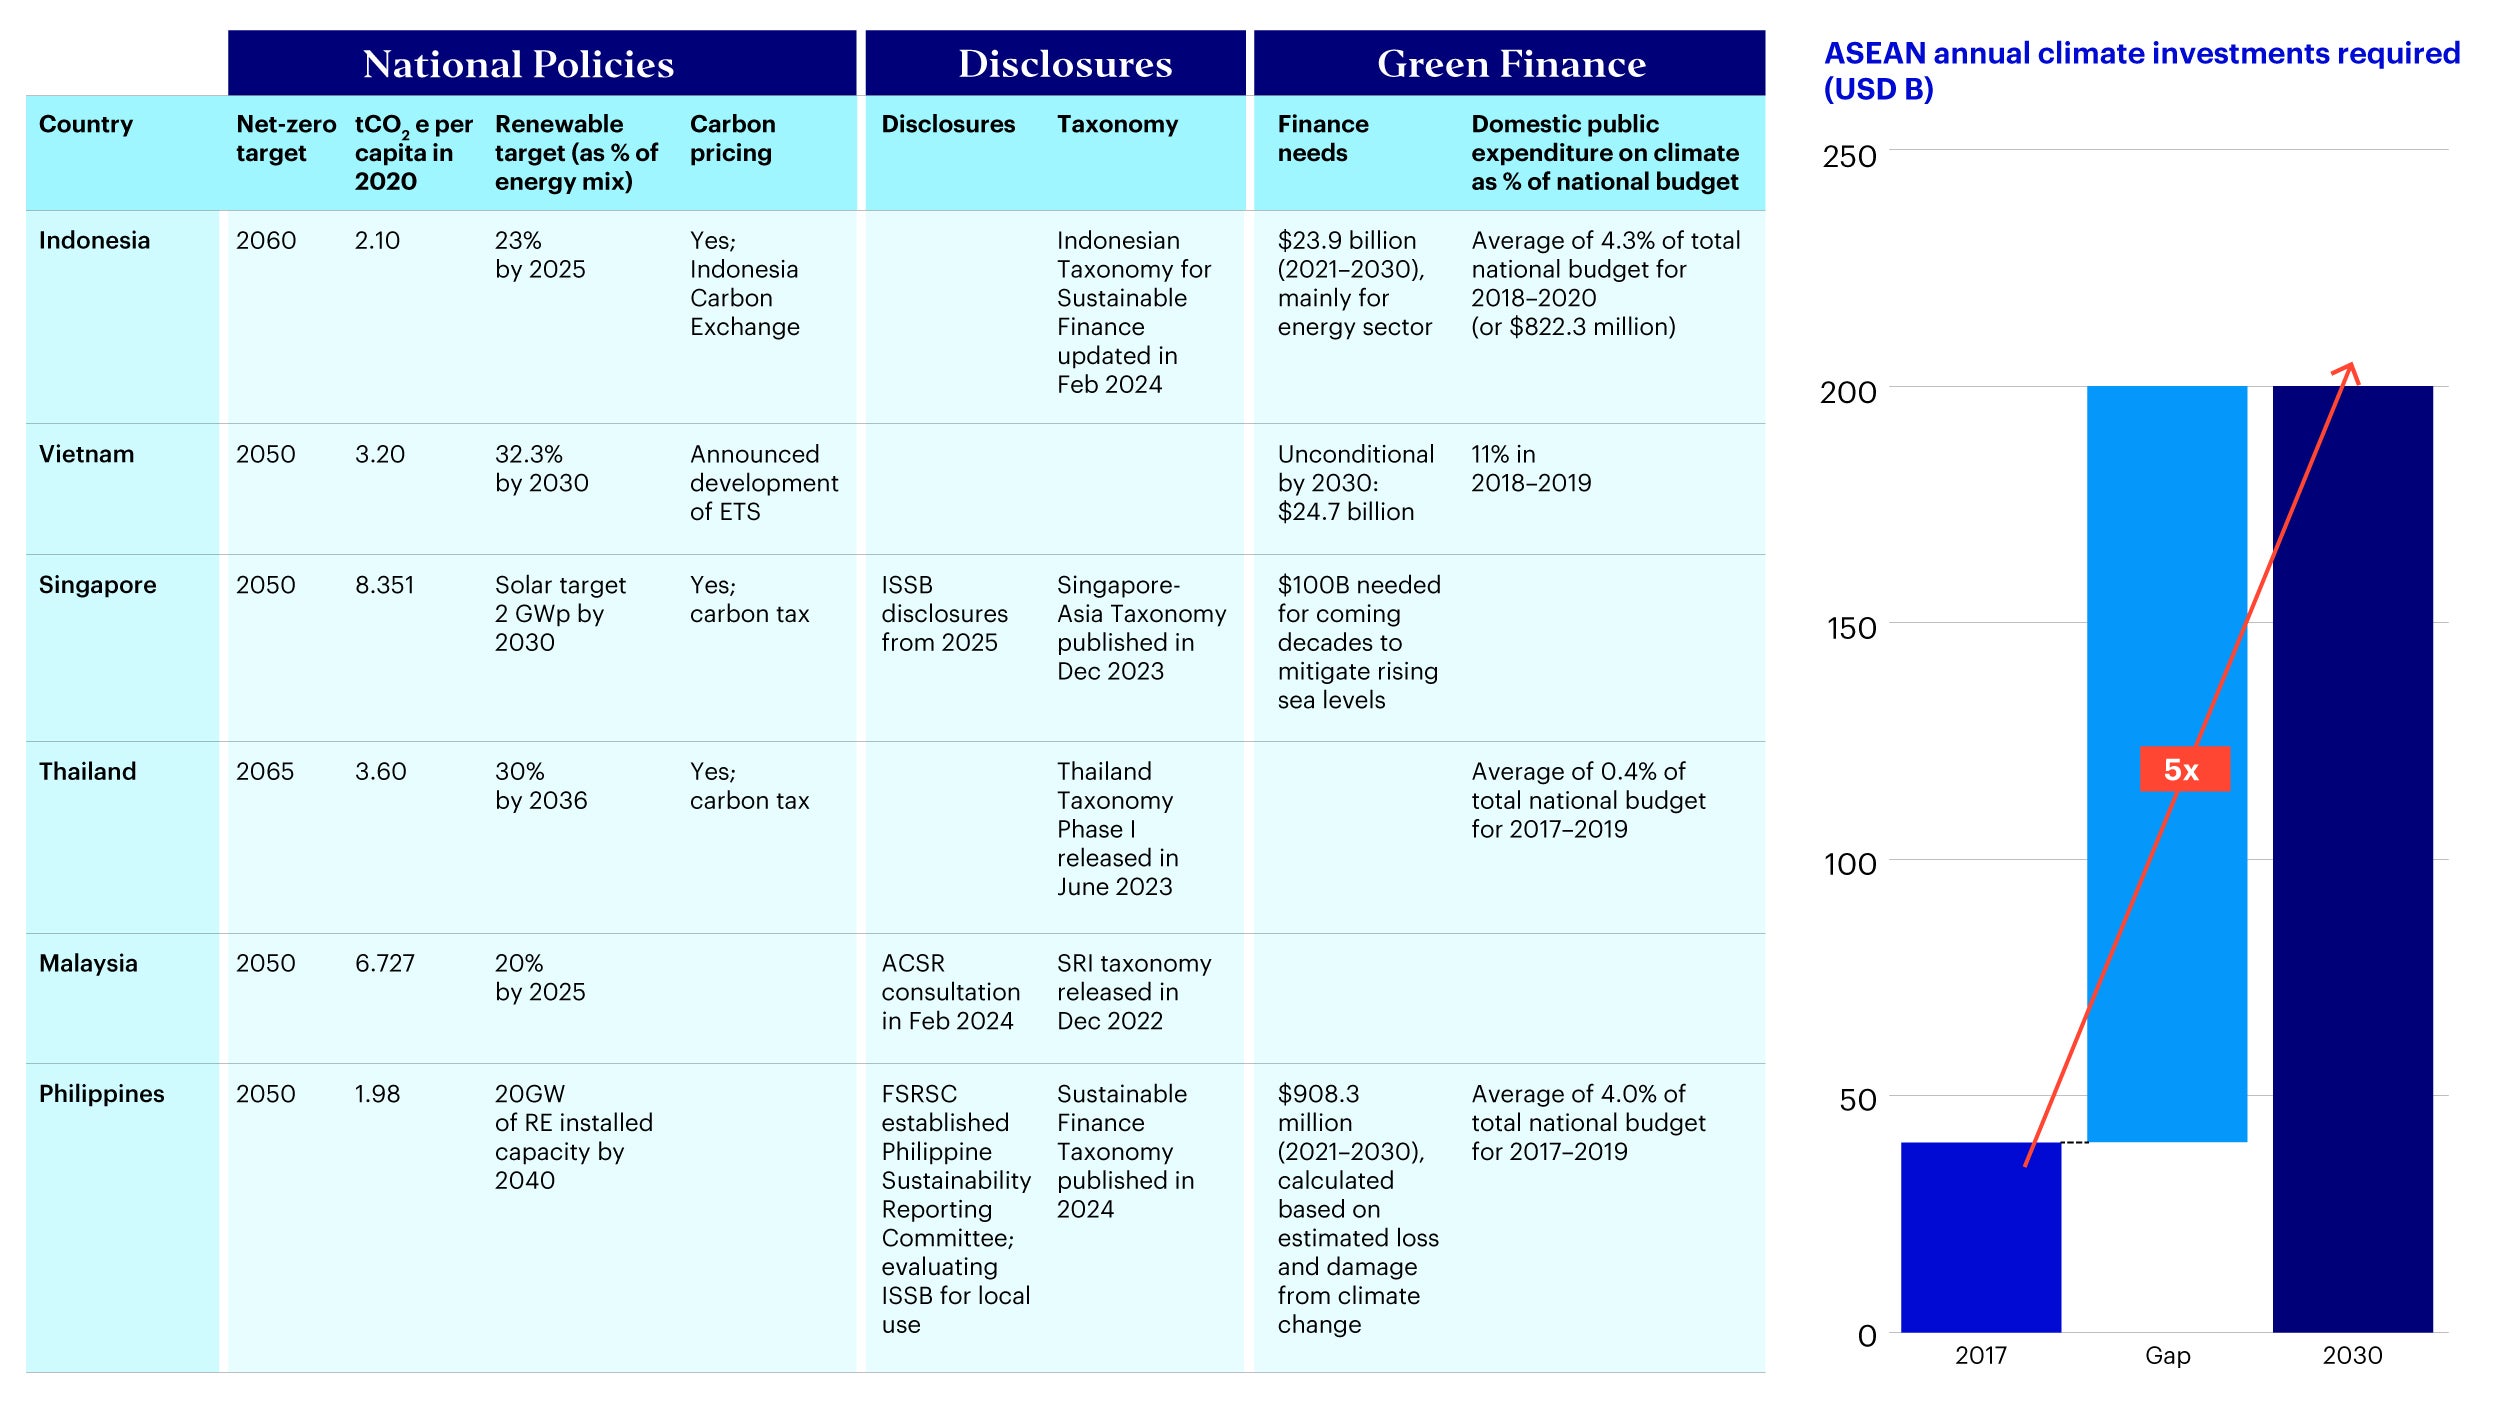 Figure 2 – Drivers of transition: national policies, disclosures/ standards & green finance drive transition in ASEAN